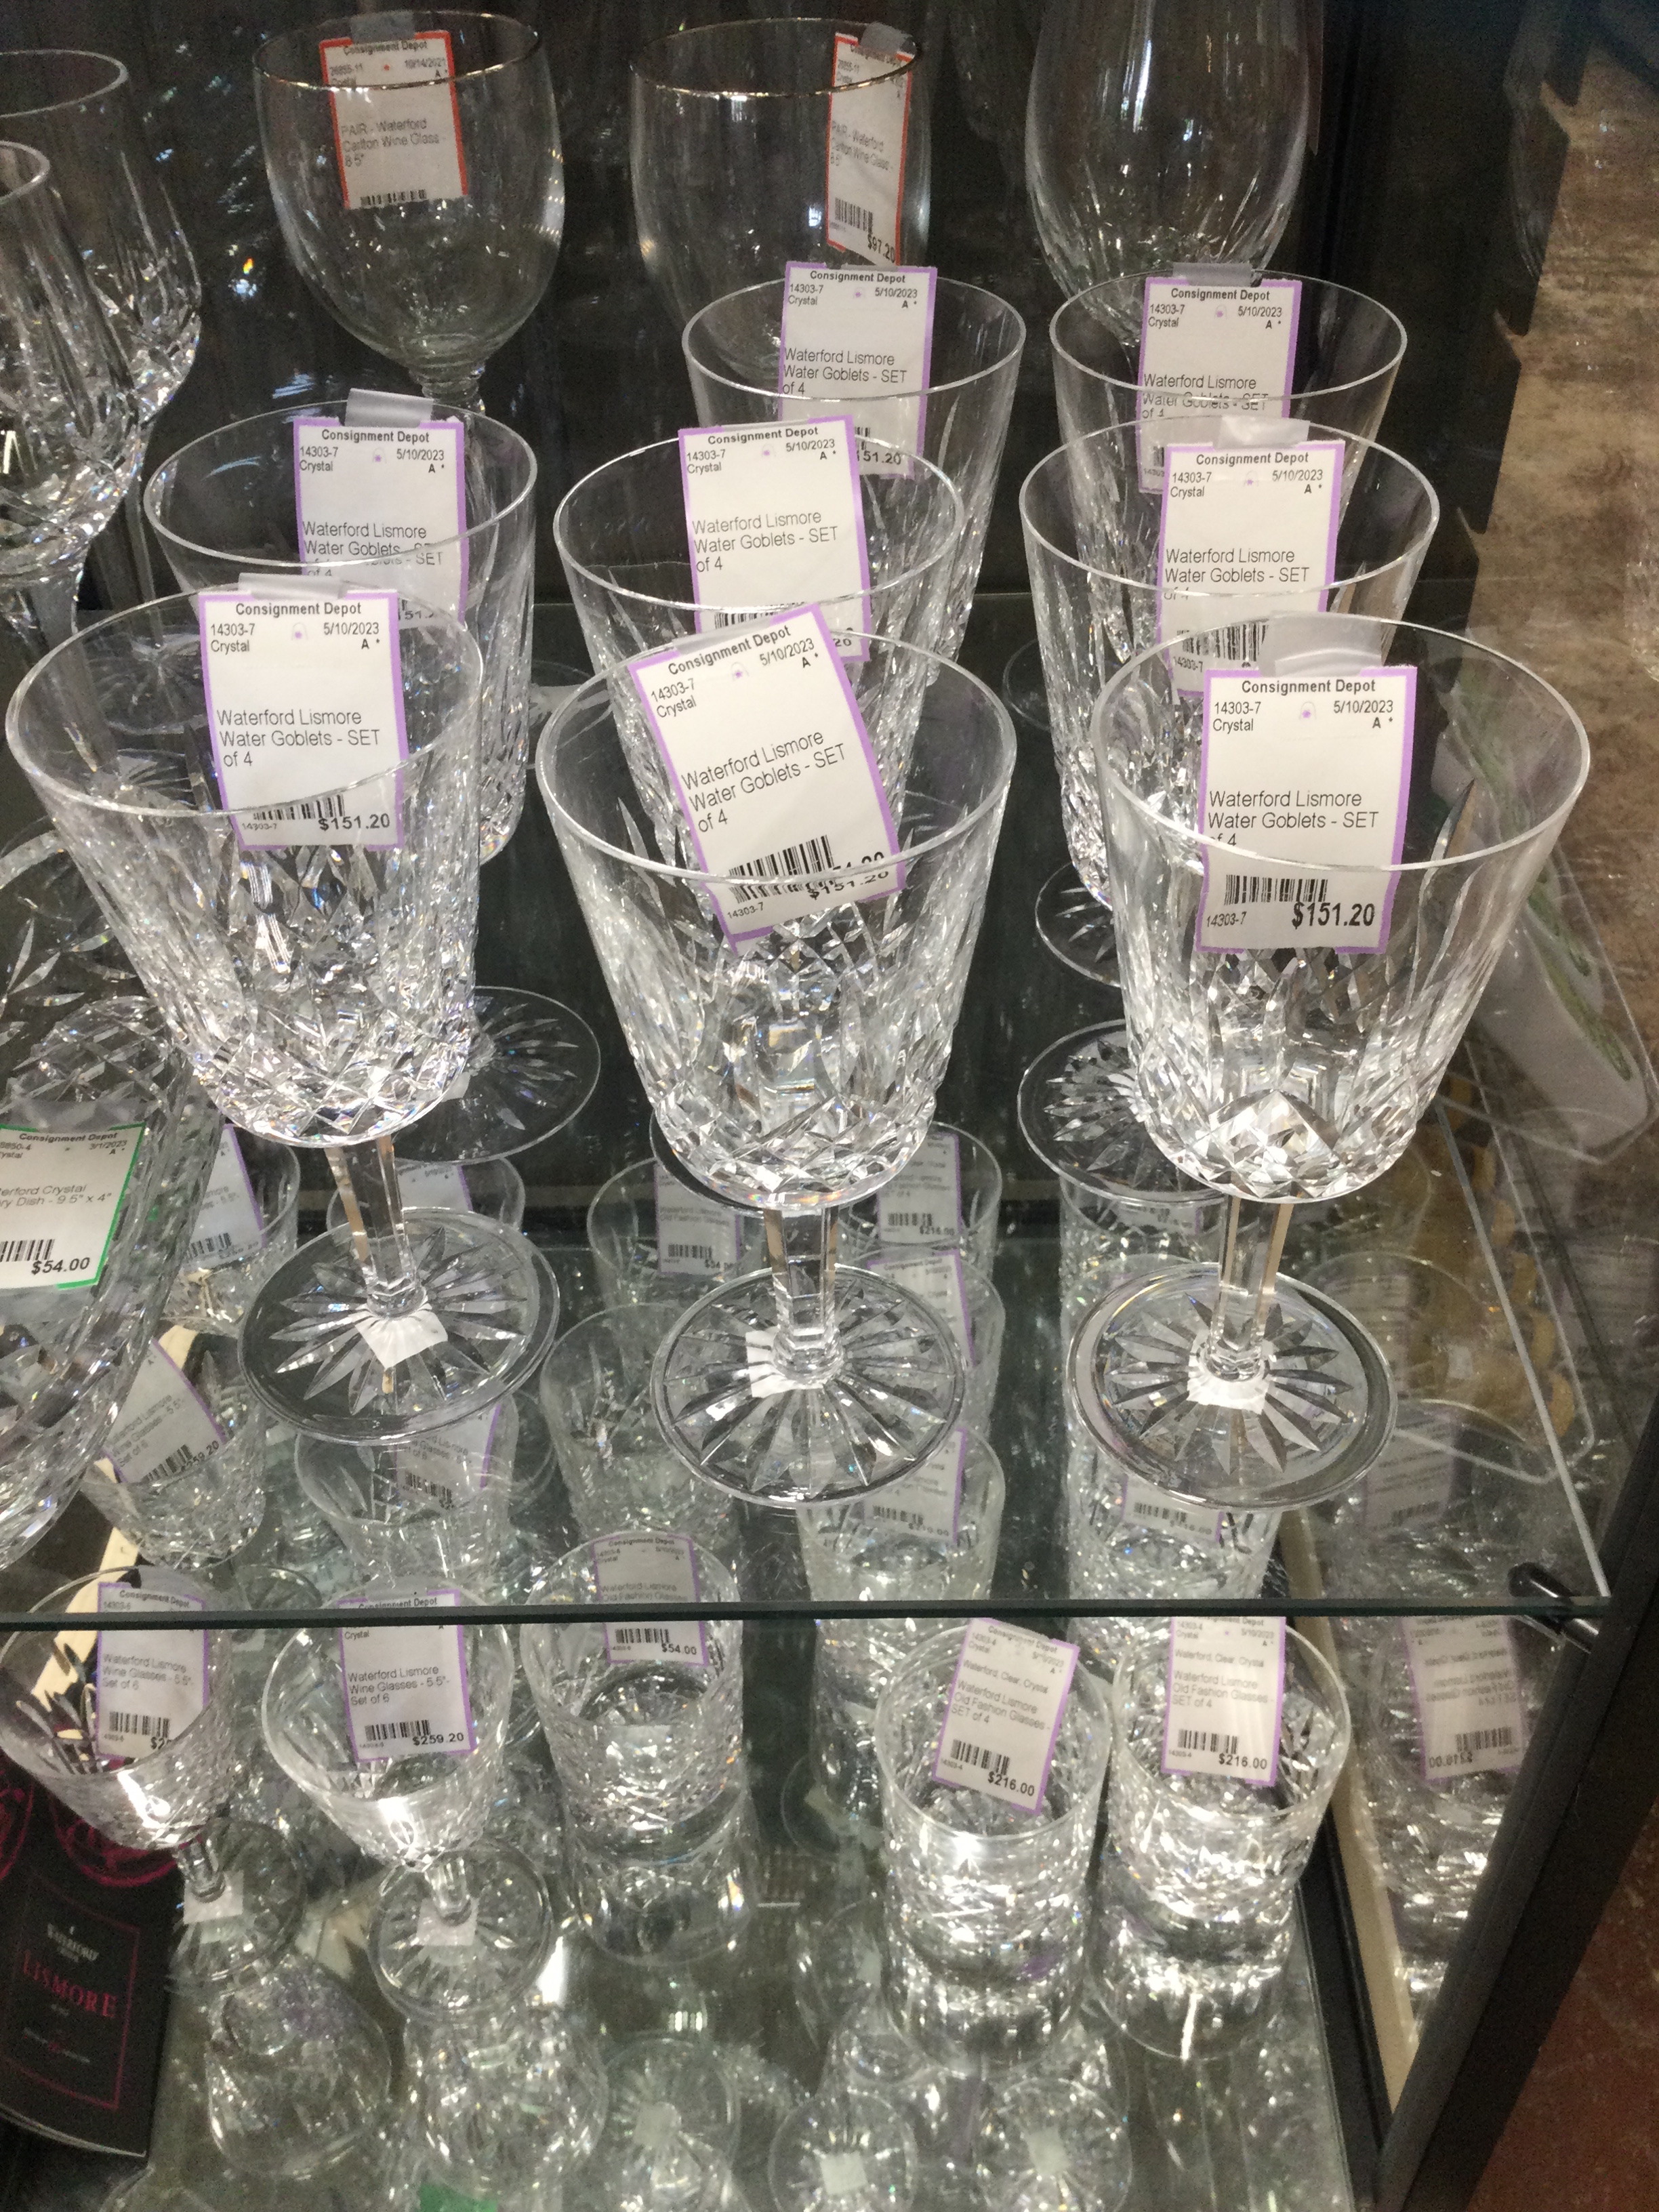 Waterford-Lismore-Water-Goblets---SET-of-4_126181A.jpg